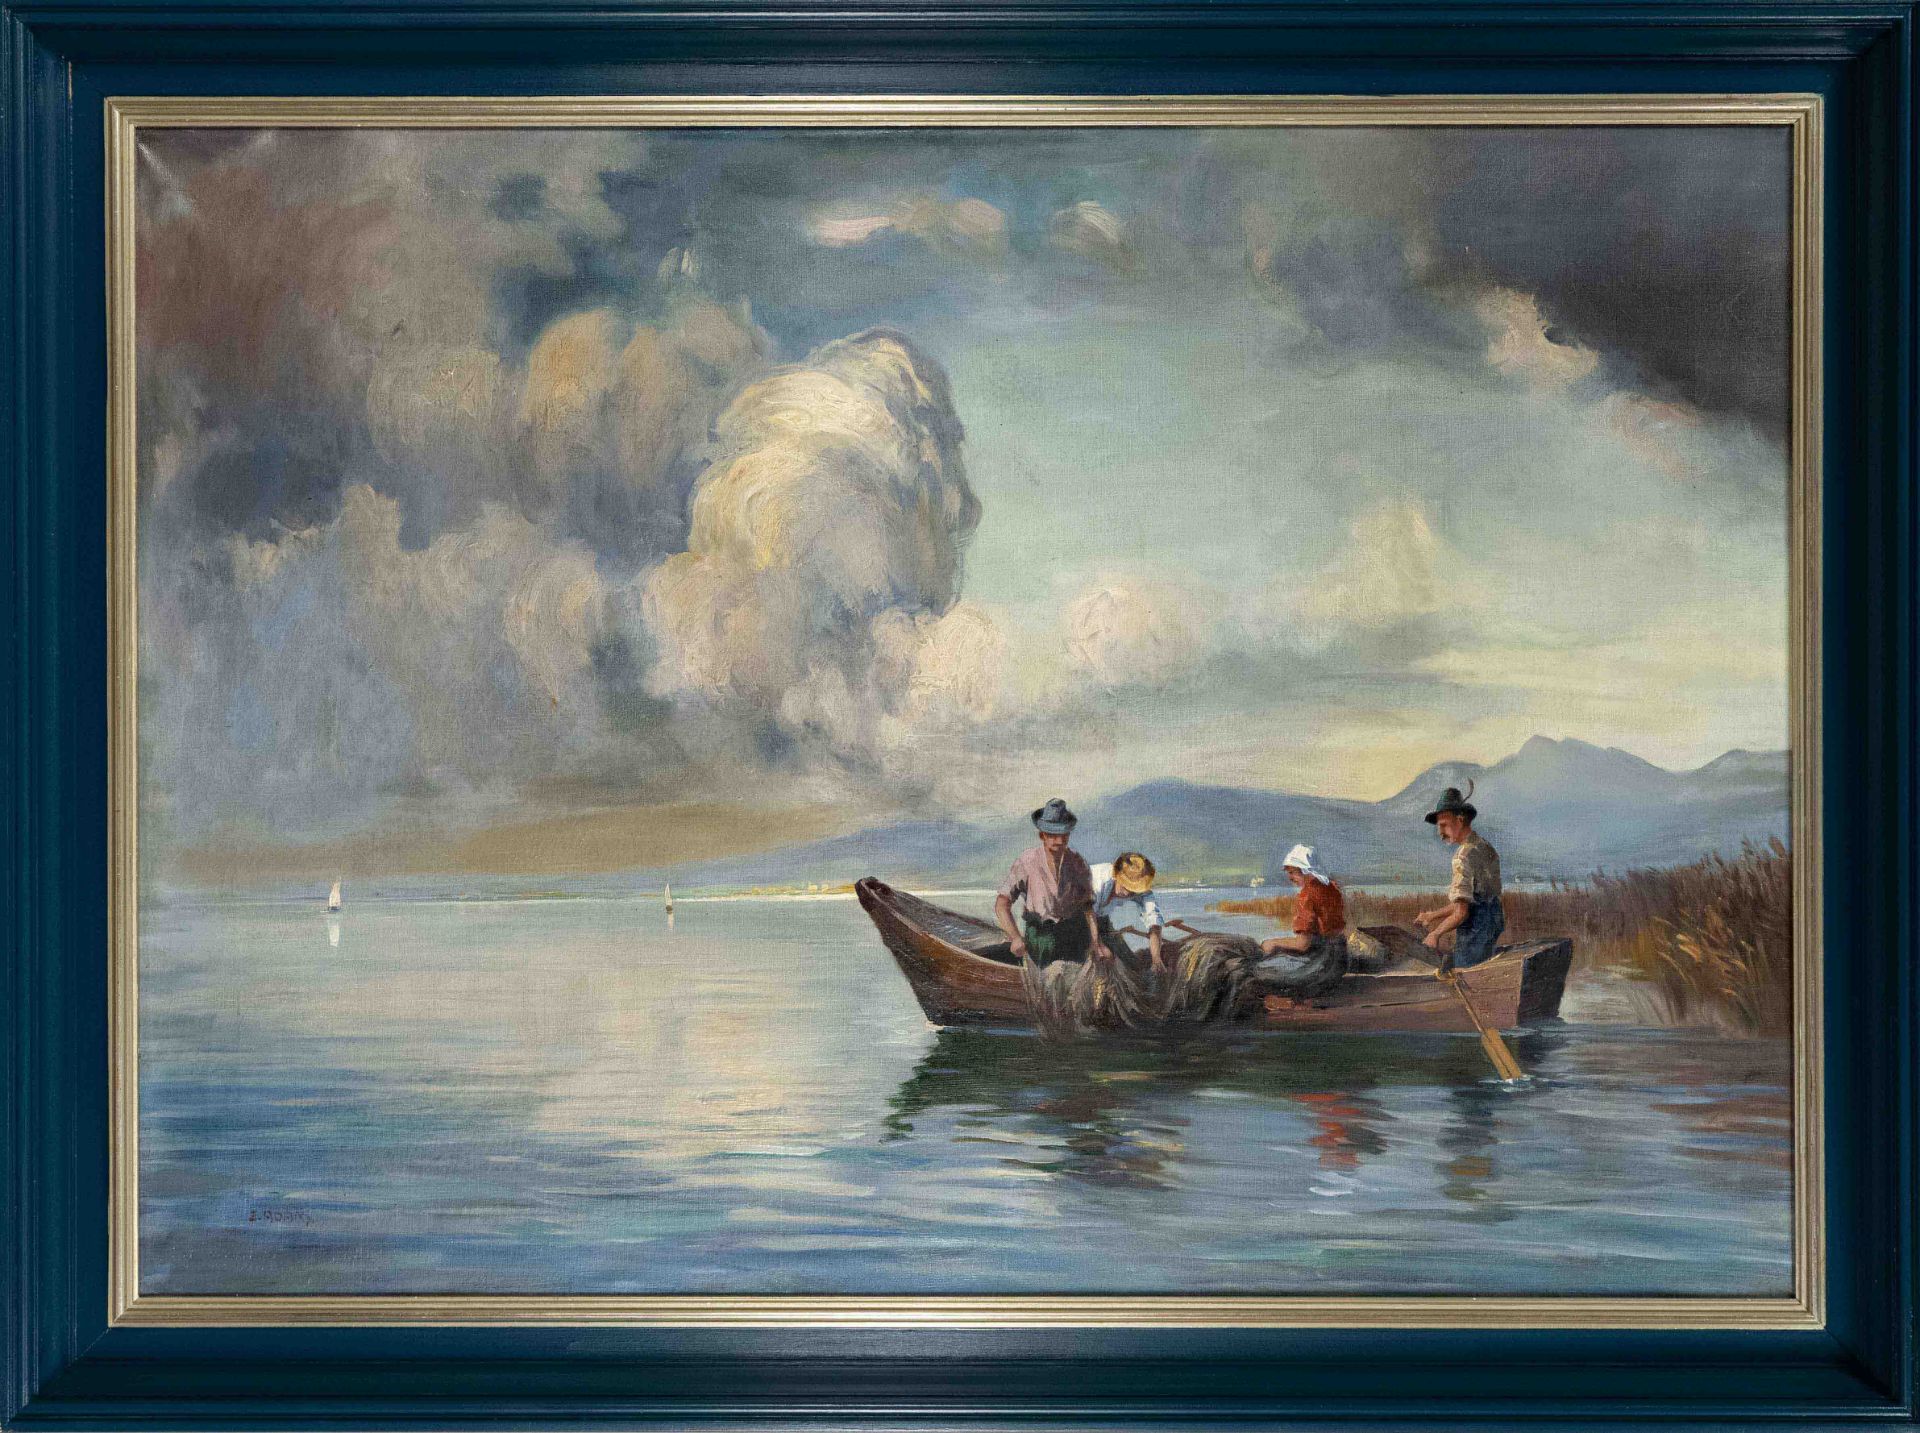 E. Adam, 1st half 20th c., large view of the Chiemsee with fishermen in the foreground. Oil on